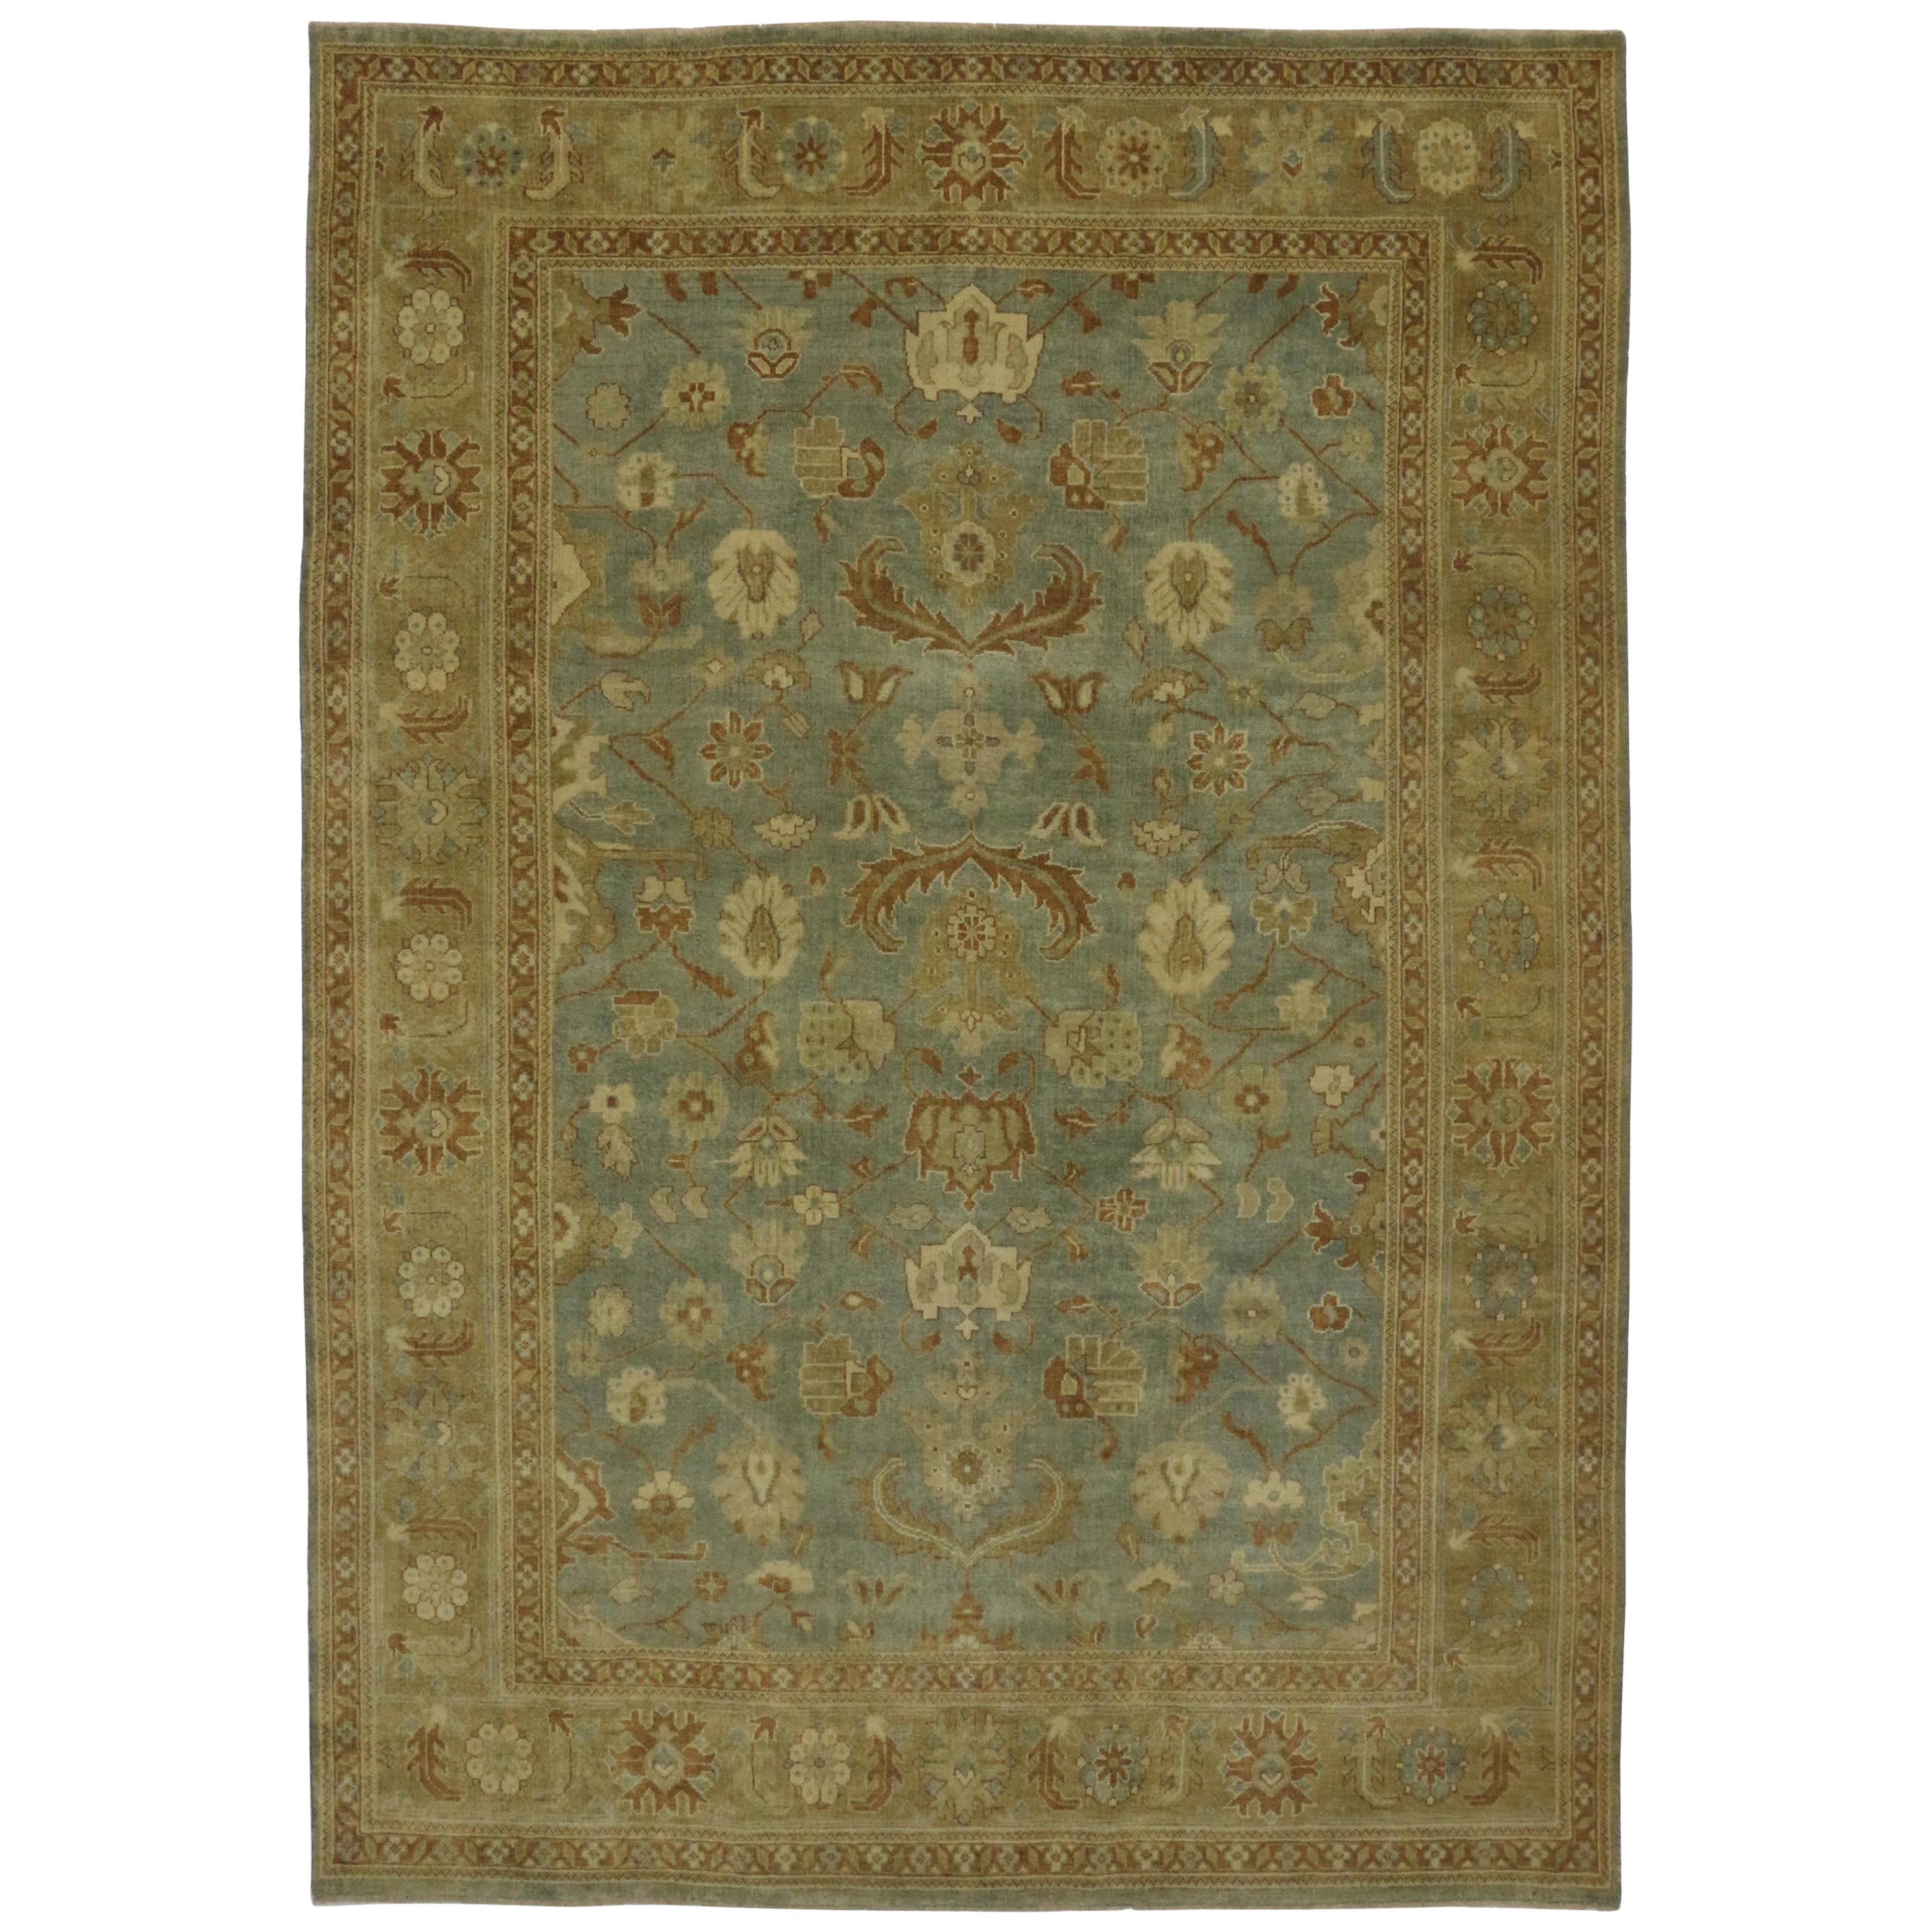 New Transitional Area Rug with Oushak Pattern and Warm Colors